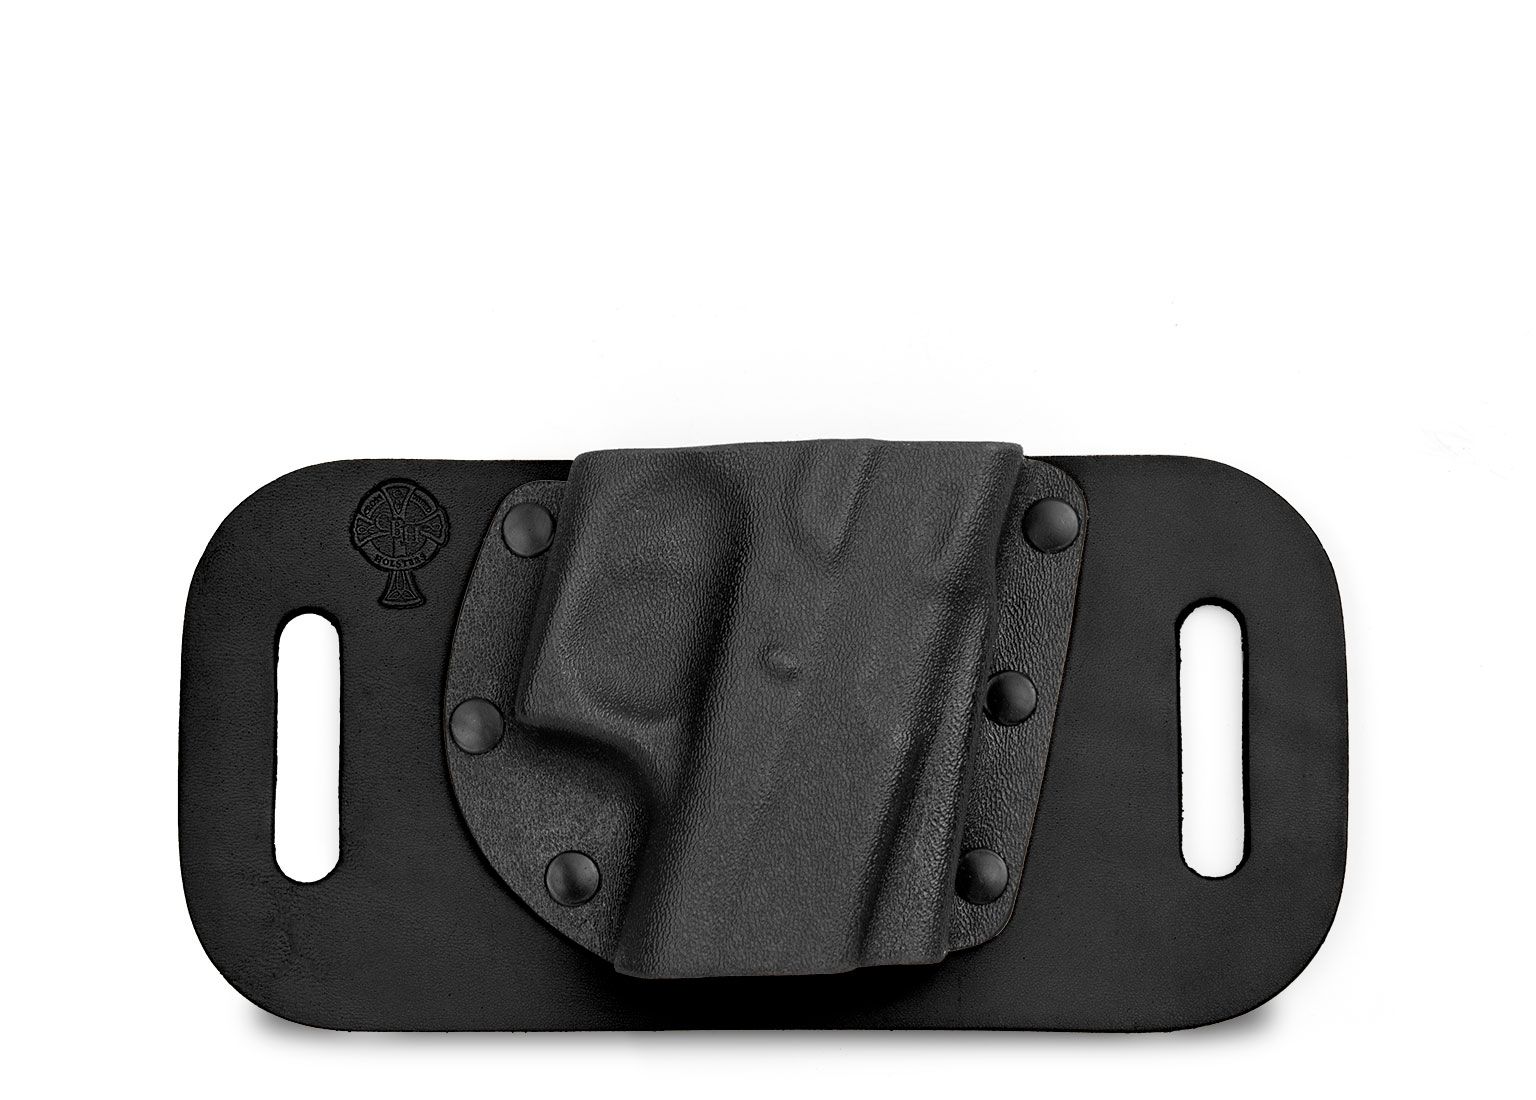 Crossbreed Holsters Snapslide Owb Holster Up To 15 Off 5 Star Rating Free Shipping Over 49